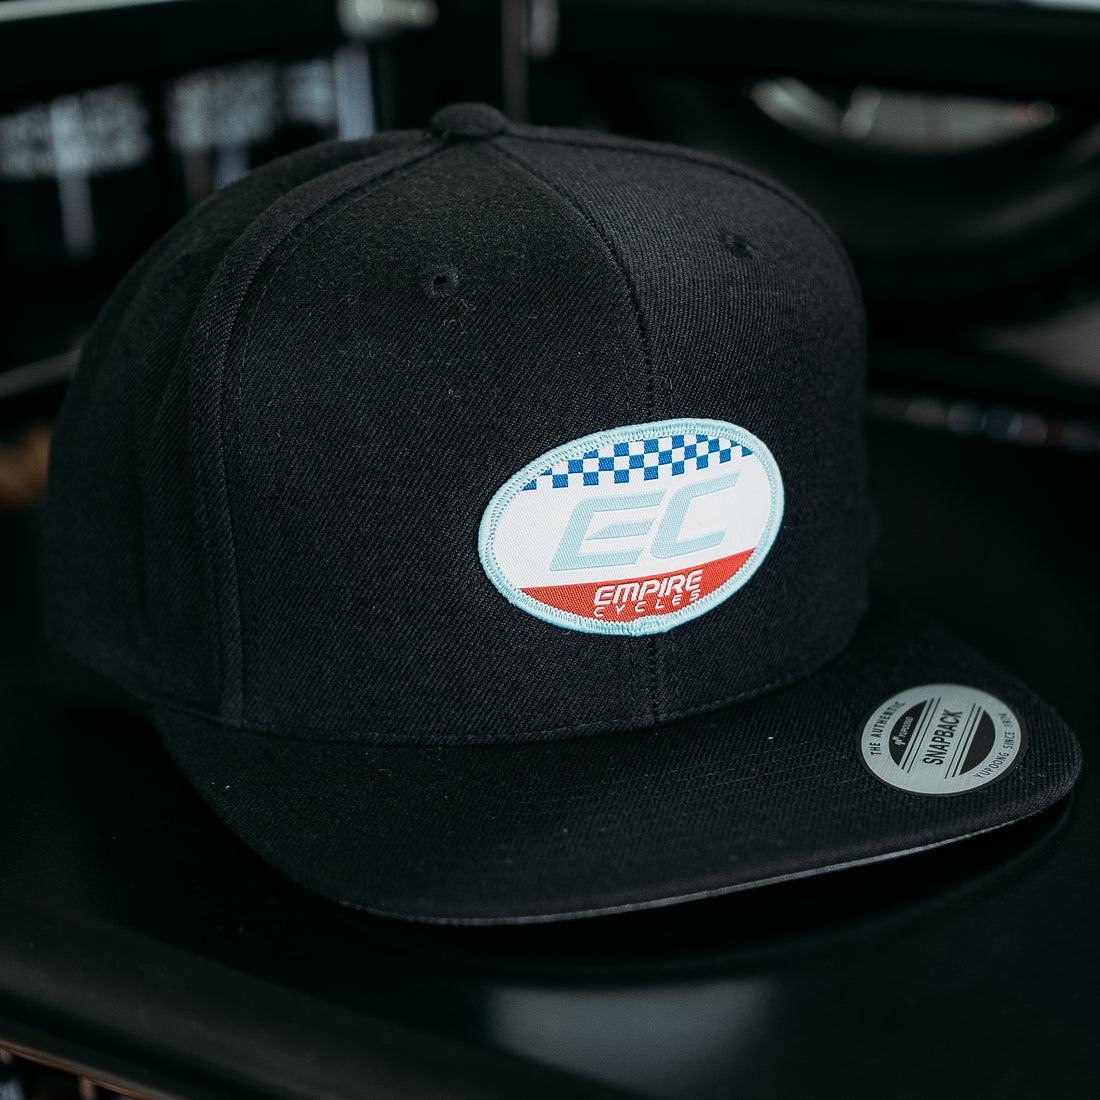 Empire Cycles Snapback Hat - Checkers